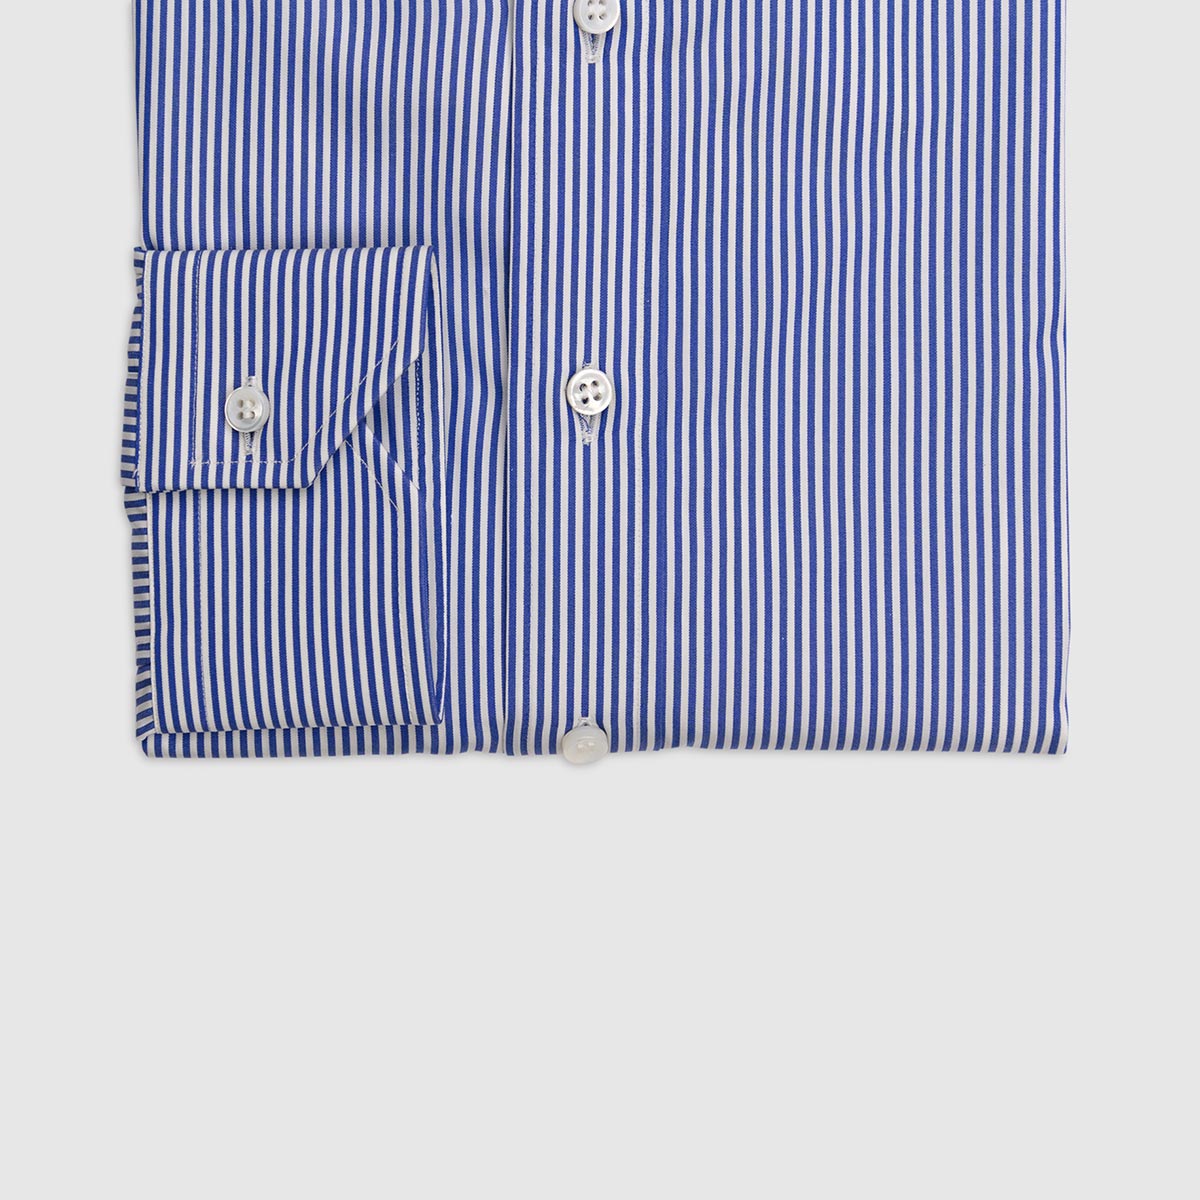 100% Double Twisted Popeline Cotton Shirt – Navy Blue and White Stripes Camiceria Ambrosiana on sale 2022 2